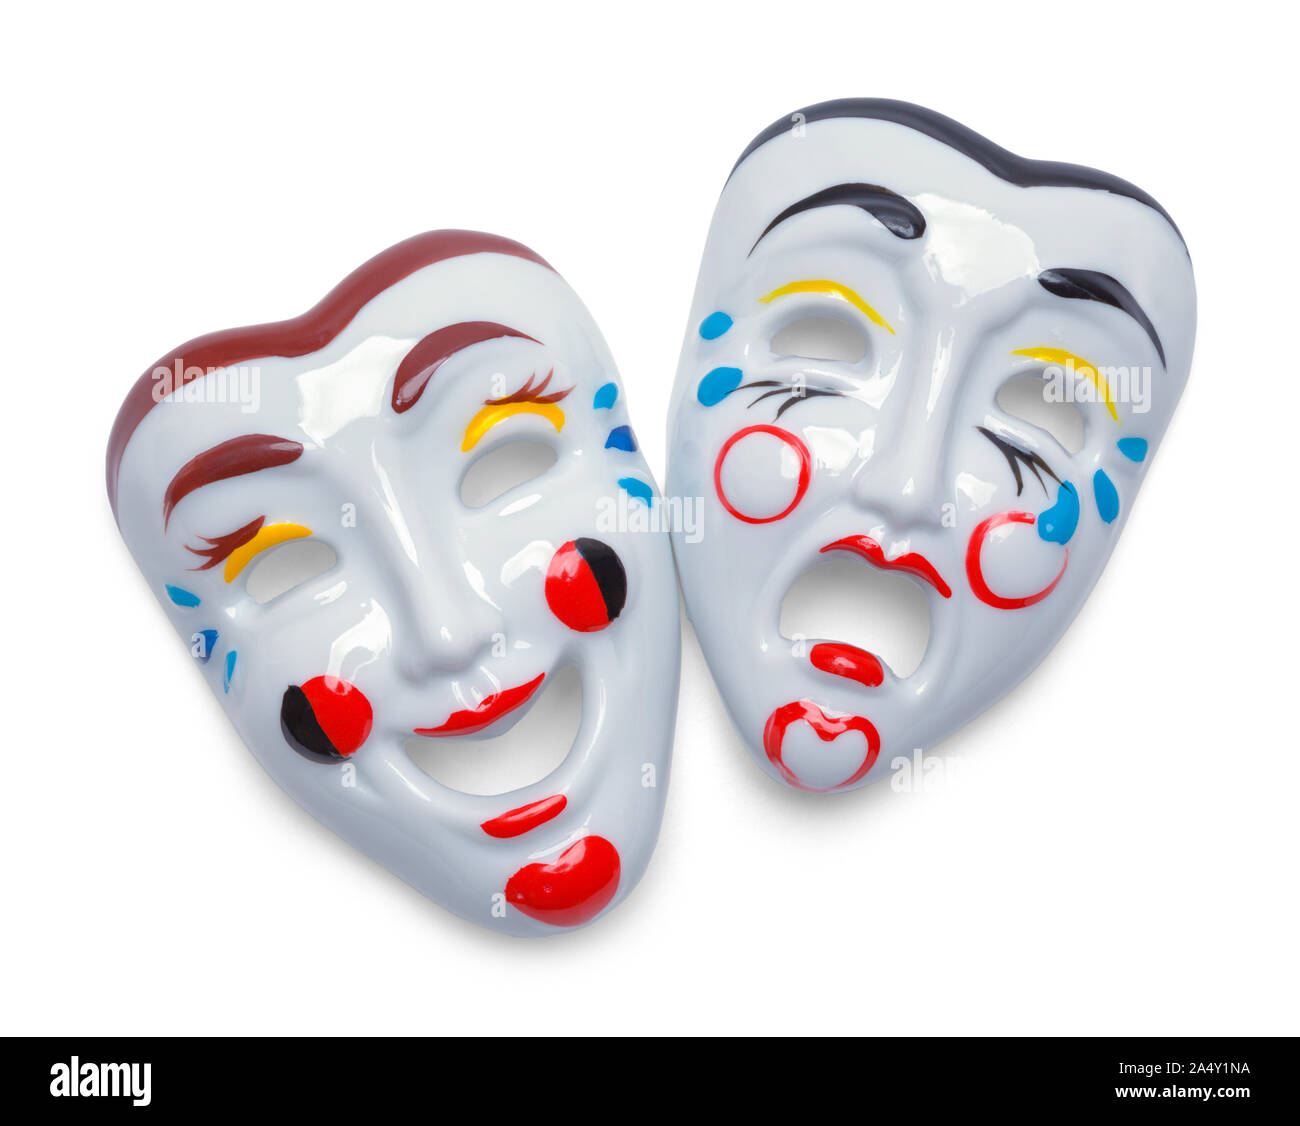 Comedy Tragedy Theater Movie Masks Isolated on White. Stock Photo